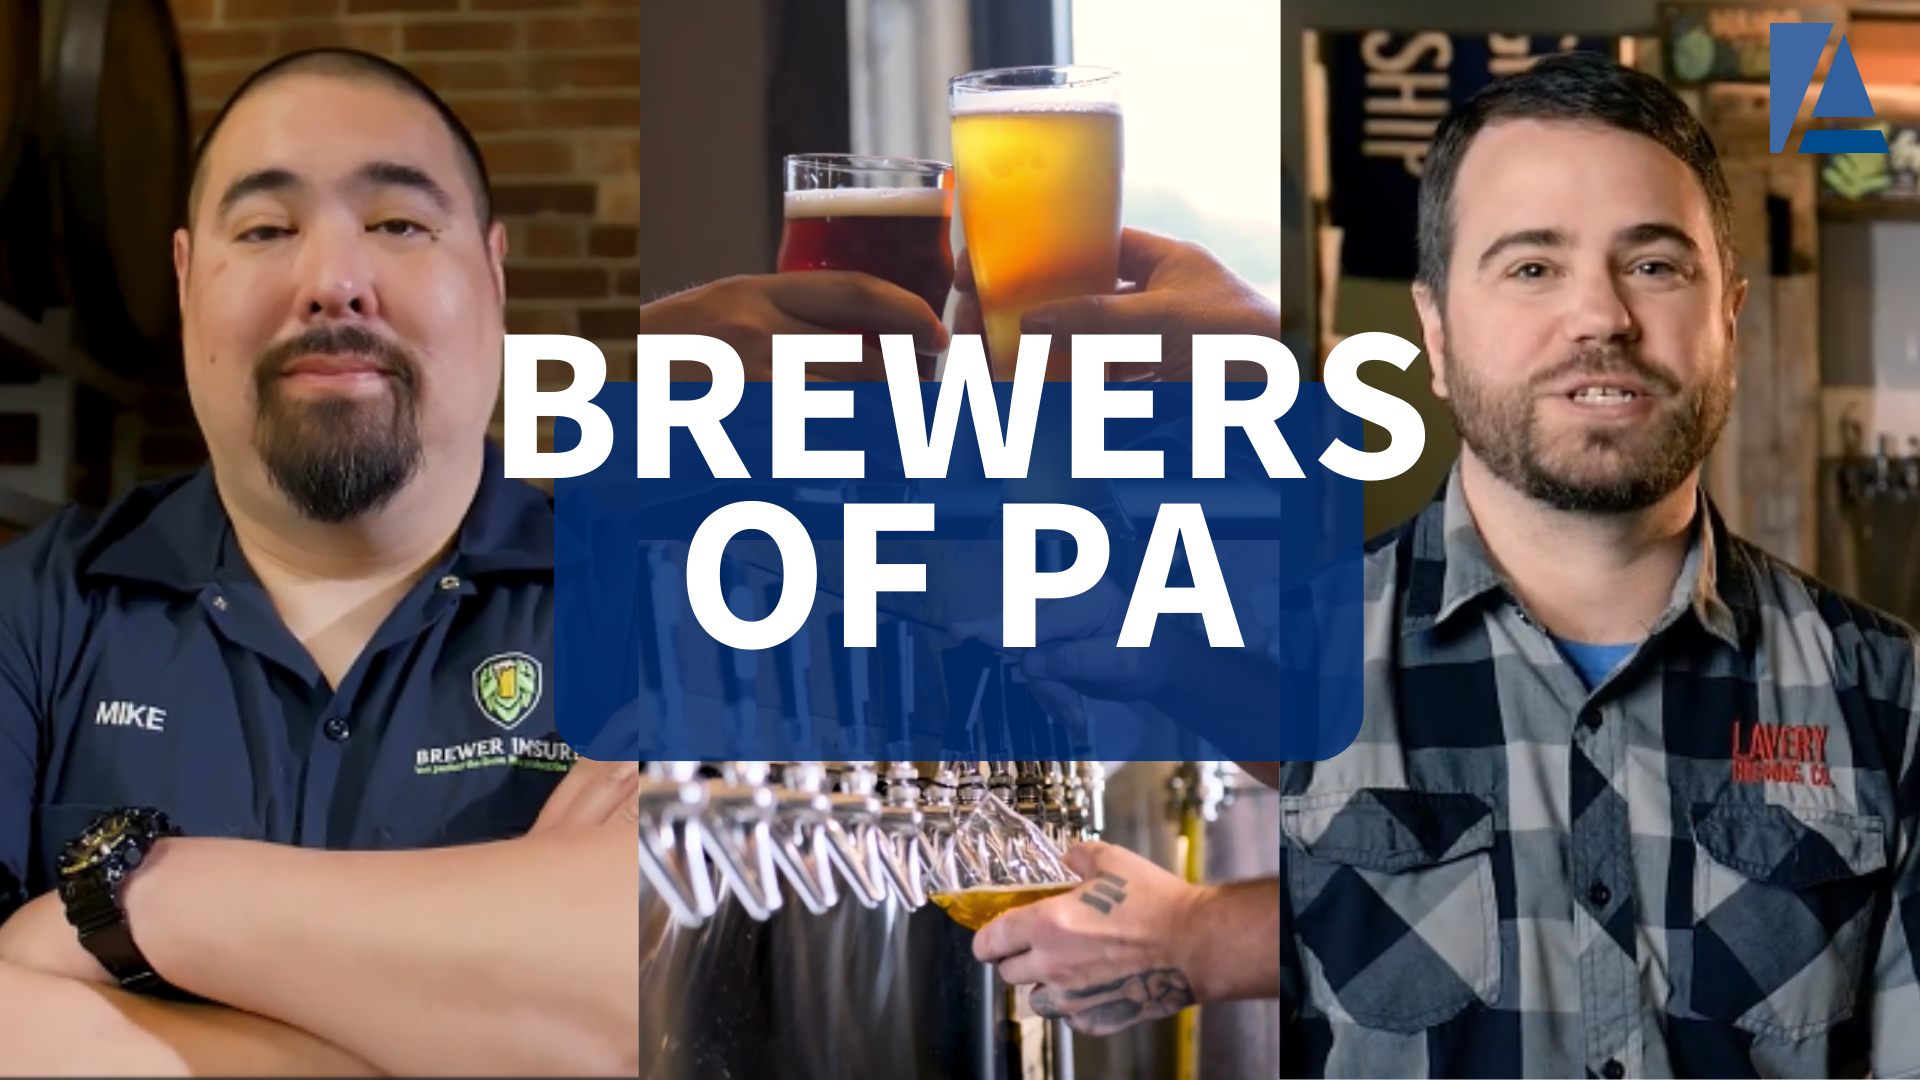 Brewers of PA